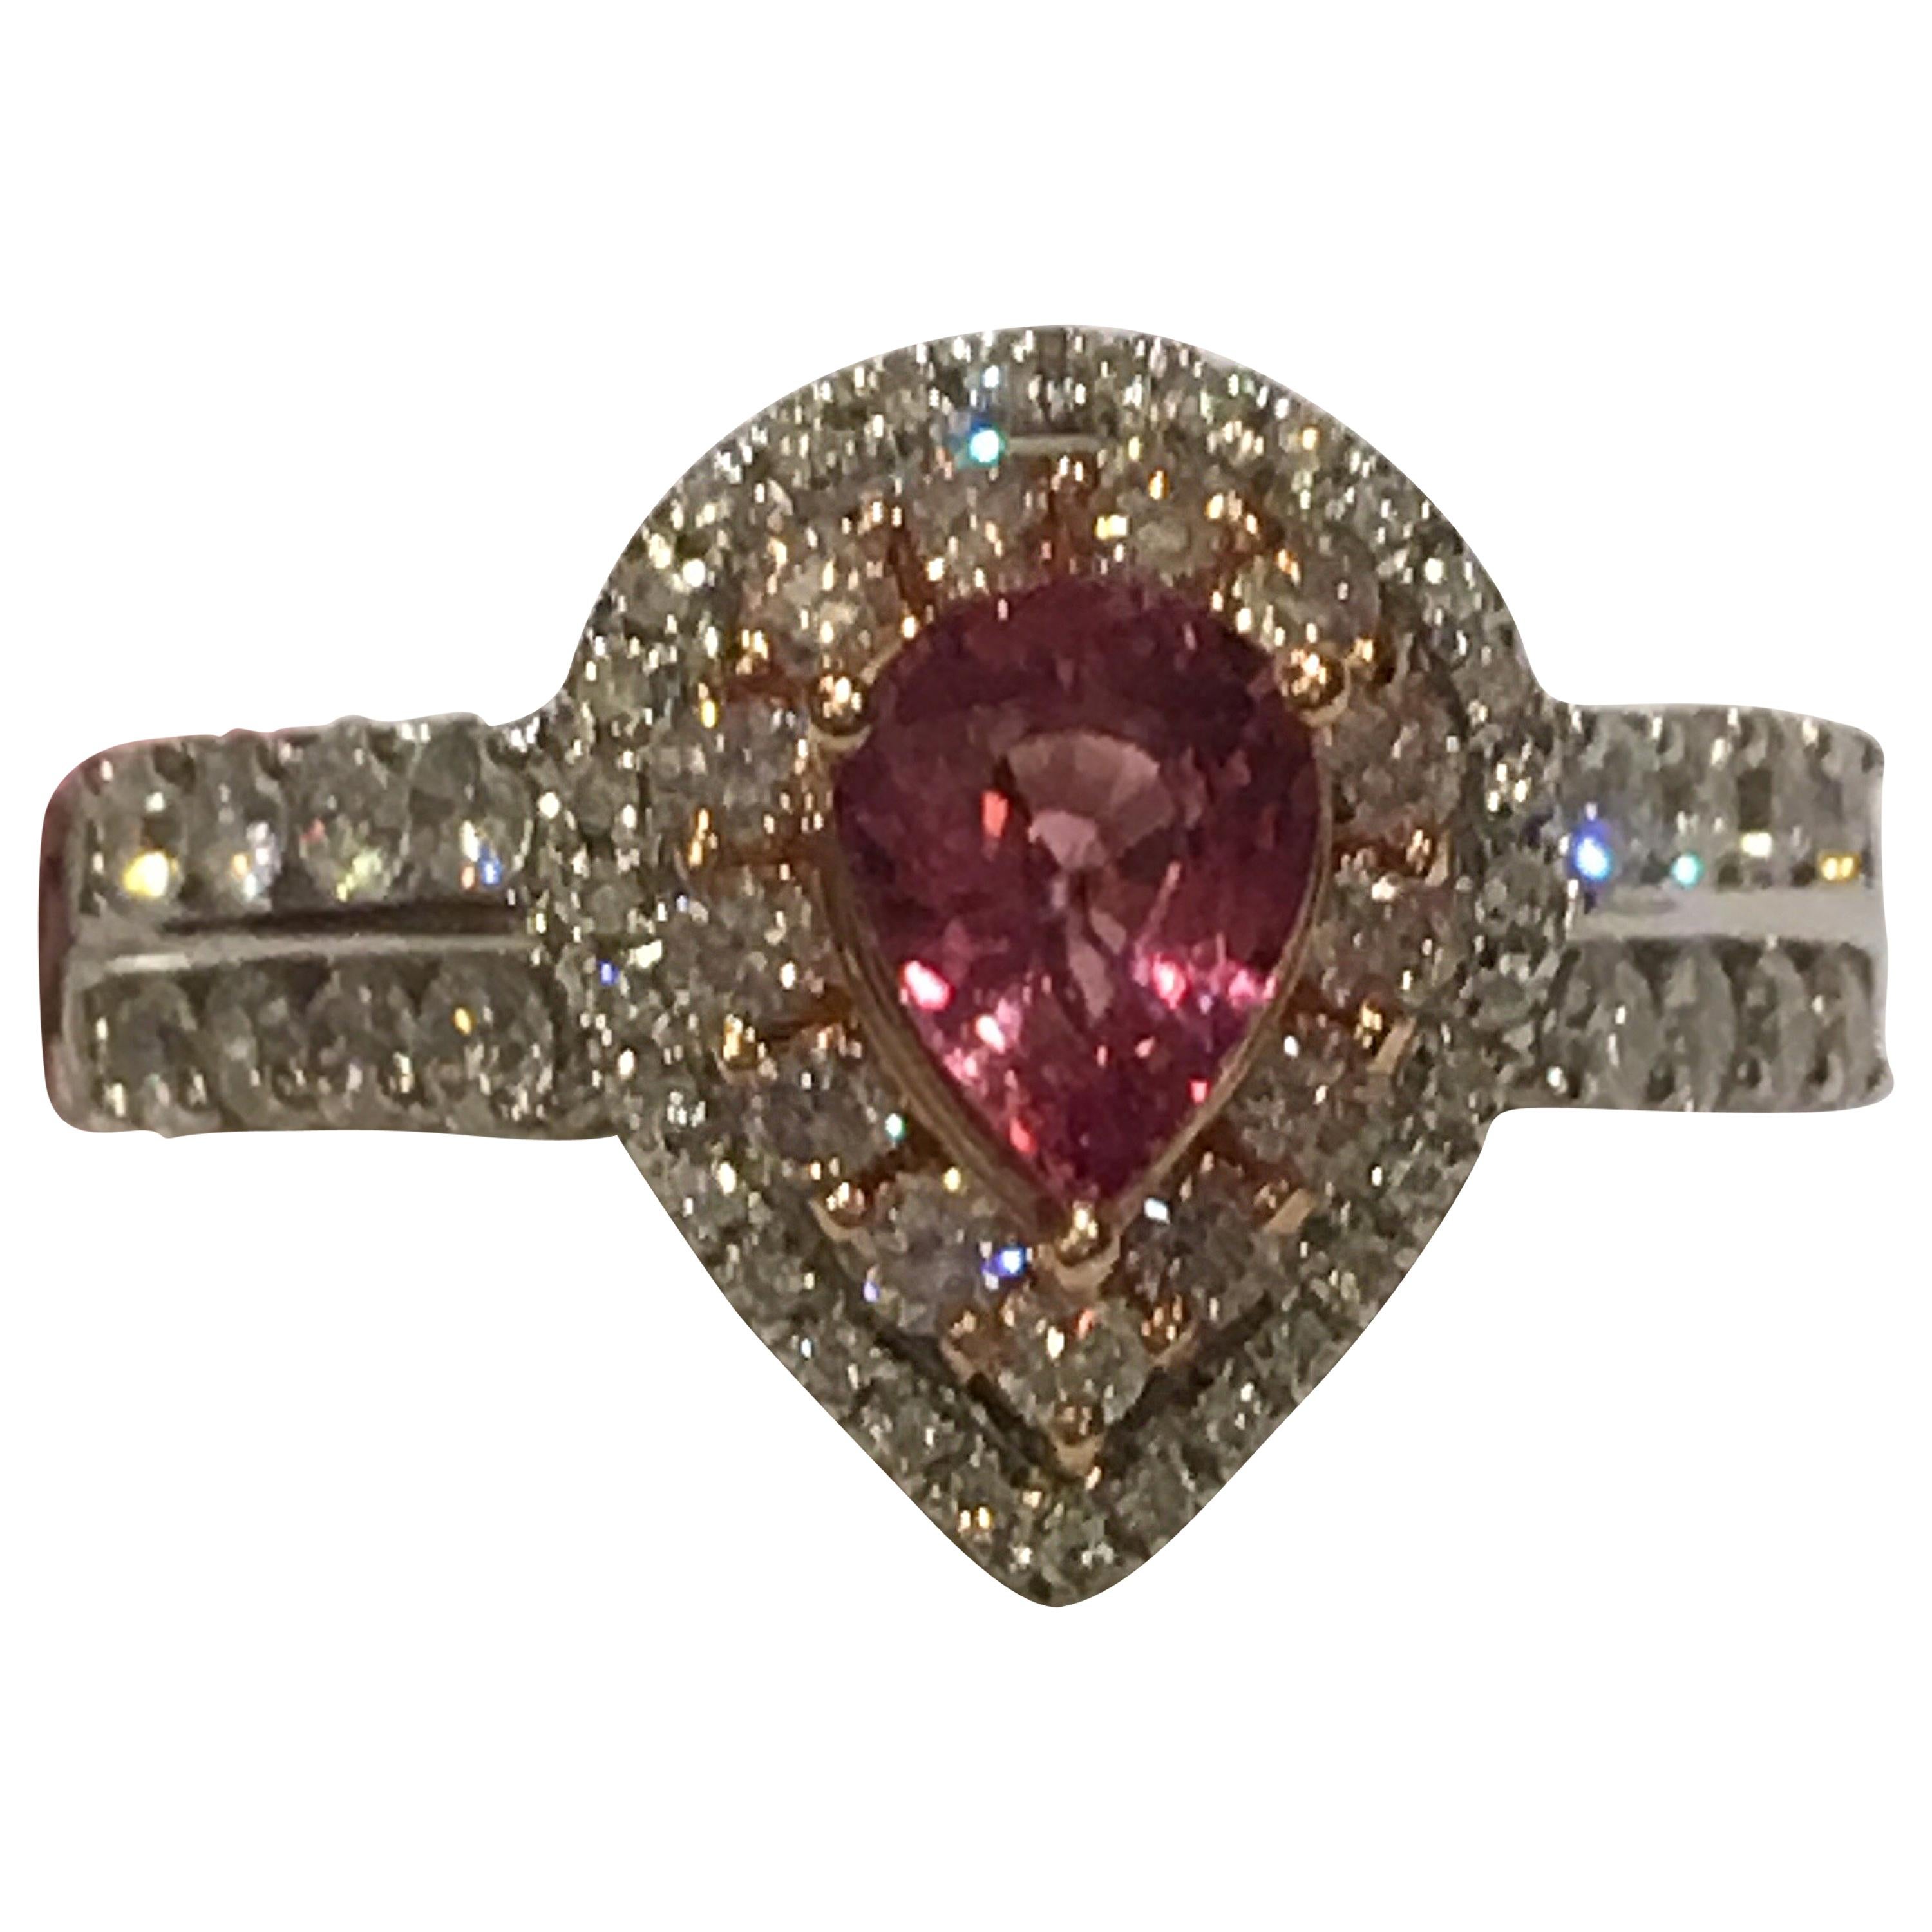 Padparadscha Sapphire Pink and White Diamonds Ring Set in 14 Karat Two-Tone Gold